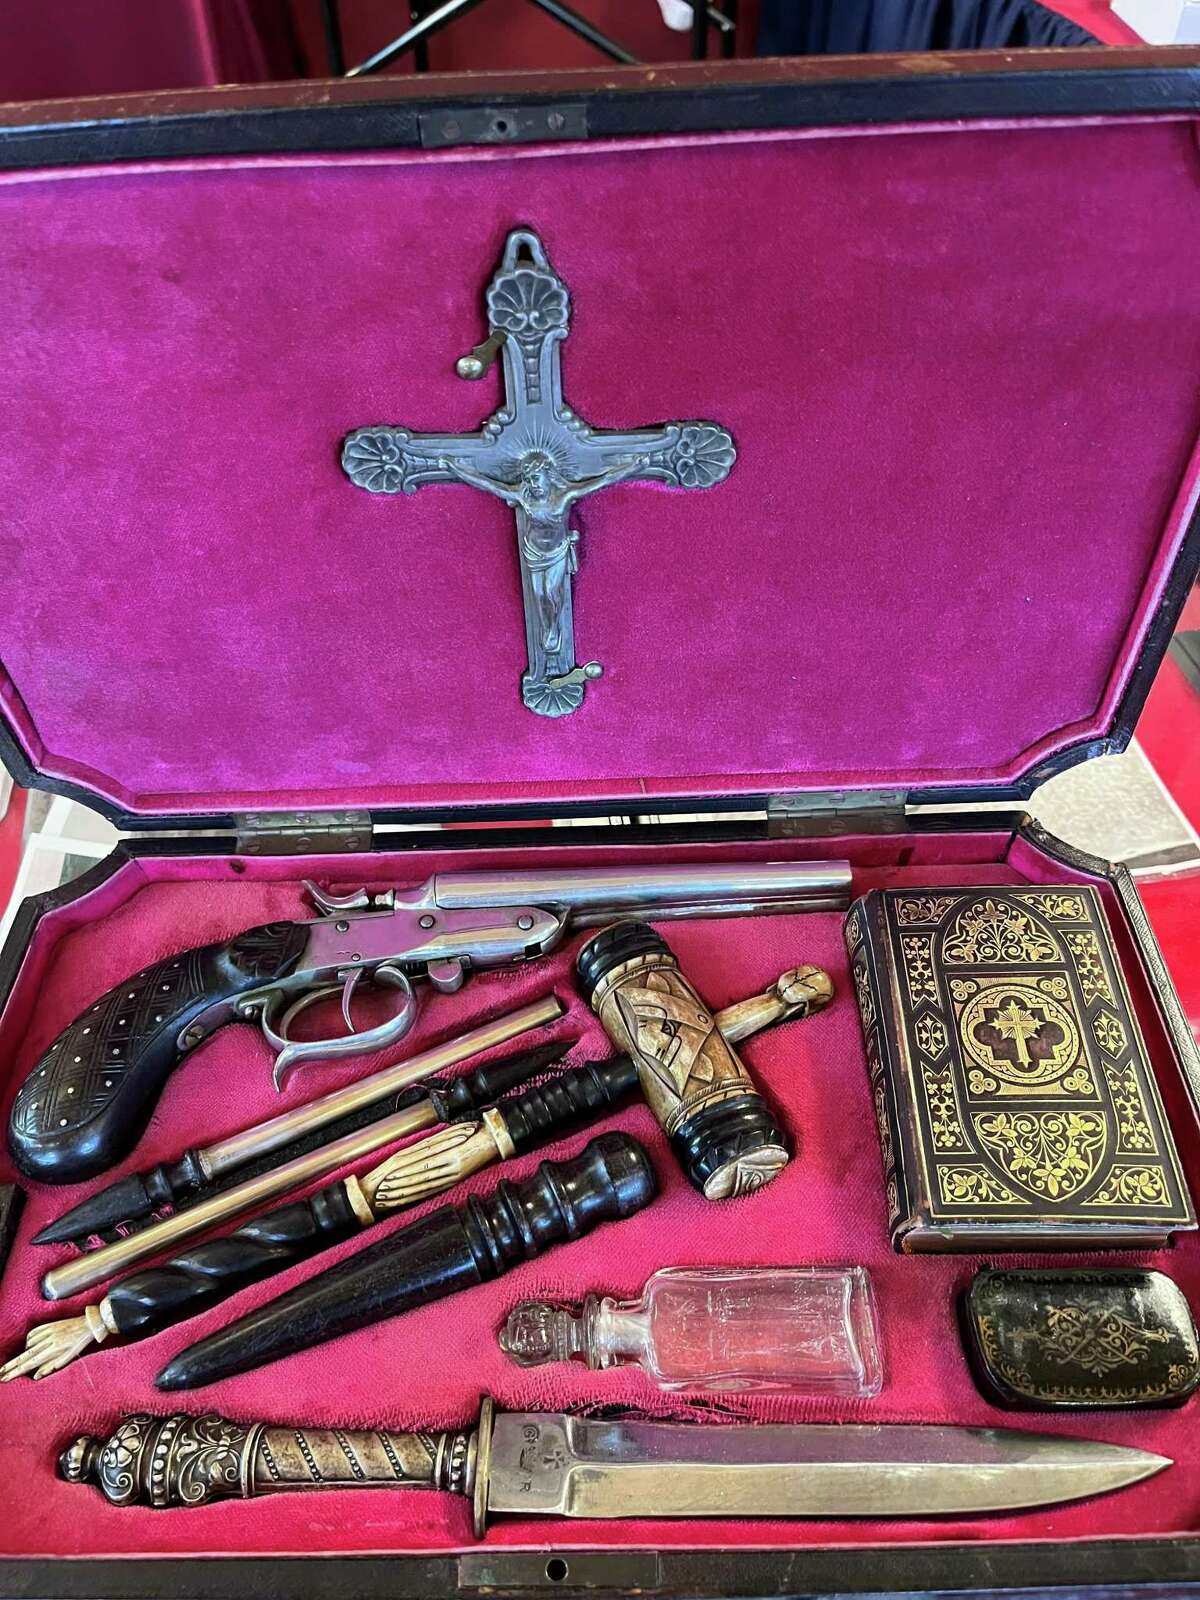 This 19th century German vampire traveling killing kit ($7,500) is one of the things Bob Axelrod will have in his Axe Antiques booth at The Compound during spring antiques week in Round Top. After "Dracula" was published in the 1890s, many Americans and British were afraid to travel in Eastern Europe, so they bought vampire killing kits such as this one, with a gun that shot wooden stakes, holy water, a bible, crucifix and a mallet for driving a wooden stake through the heart of a vampire.